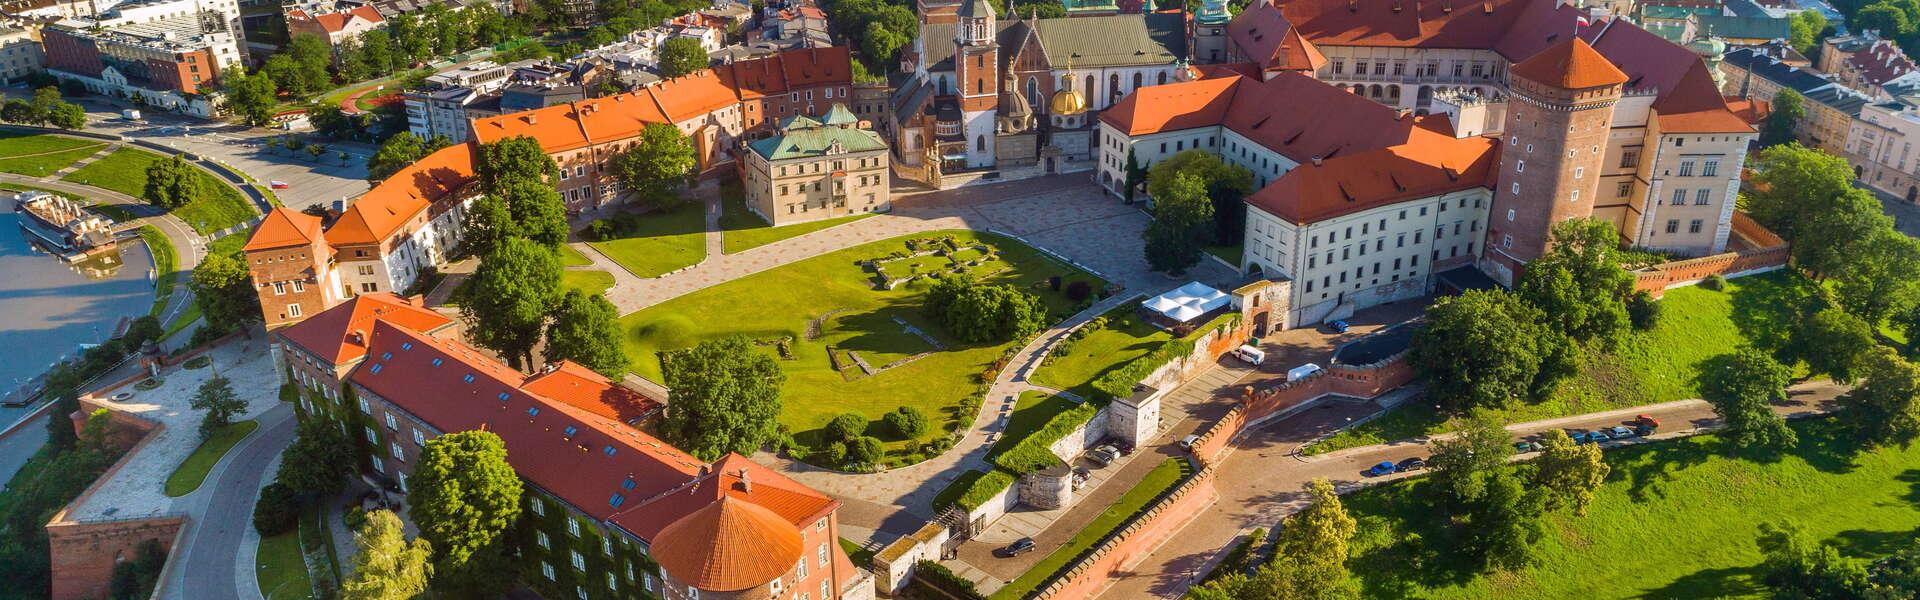 Wawel Royal Castle from a bird's eye view. The Castle courtyard covered with grass. Shrubs around. Buildings in the background.